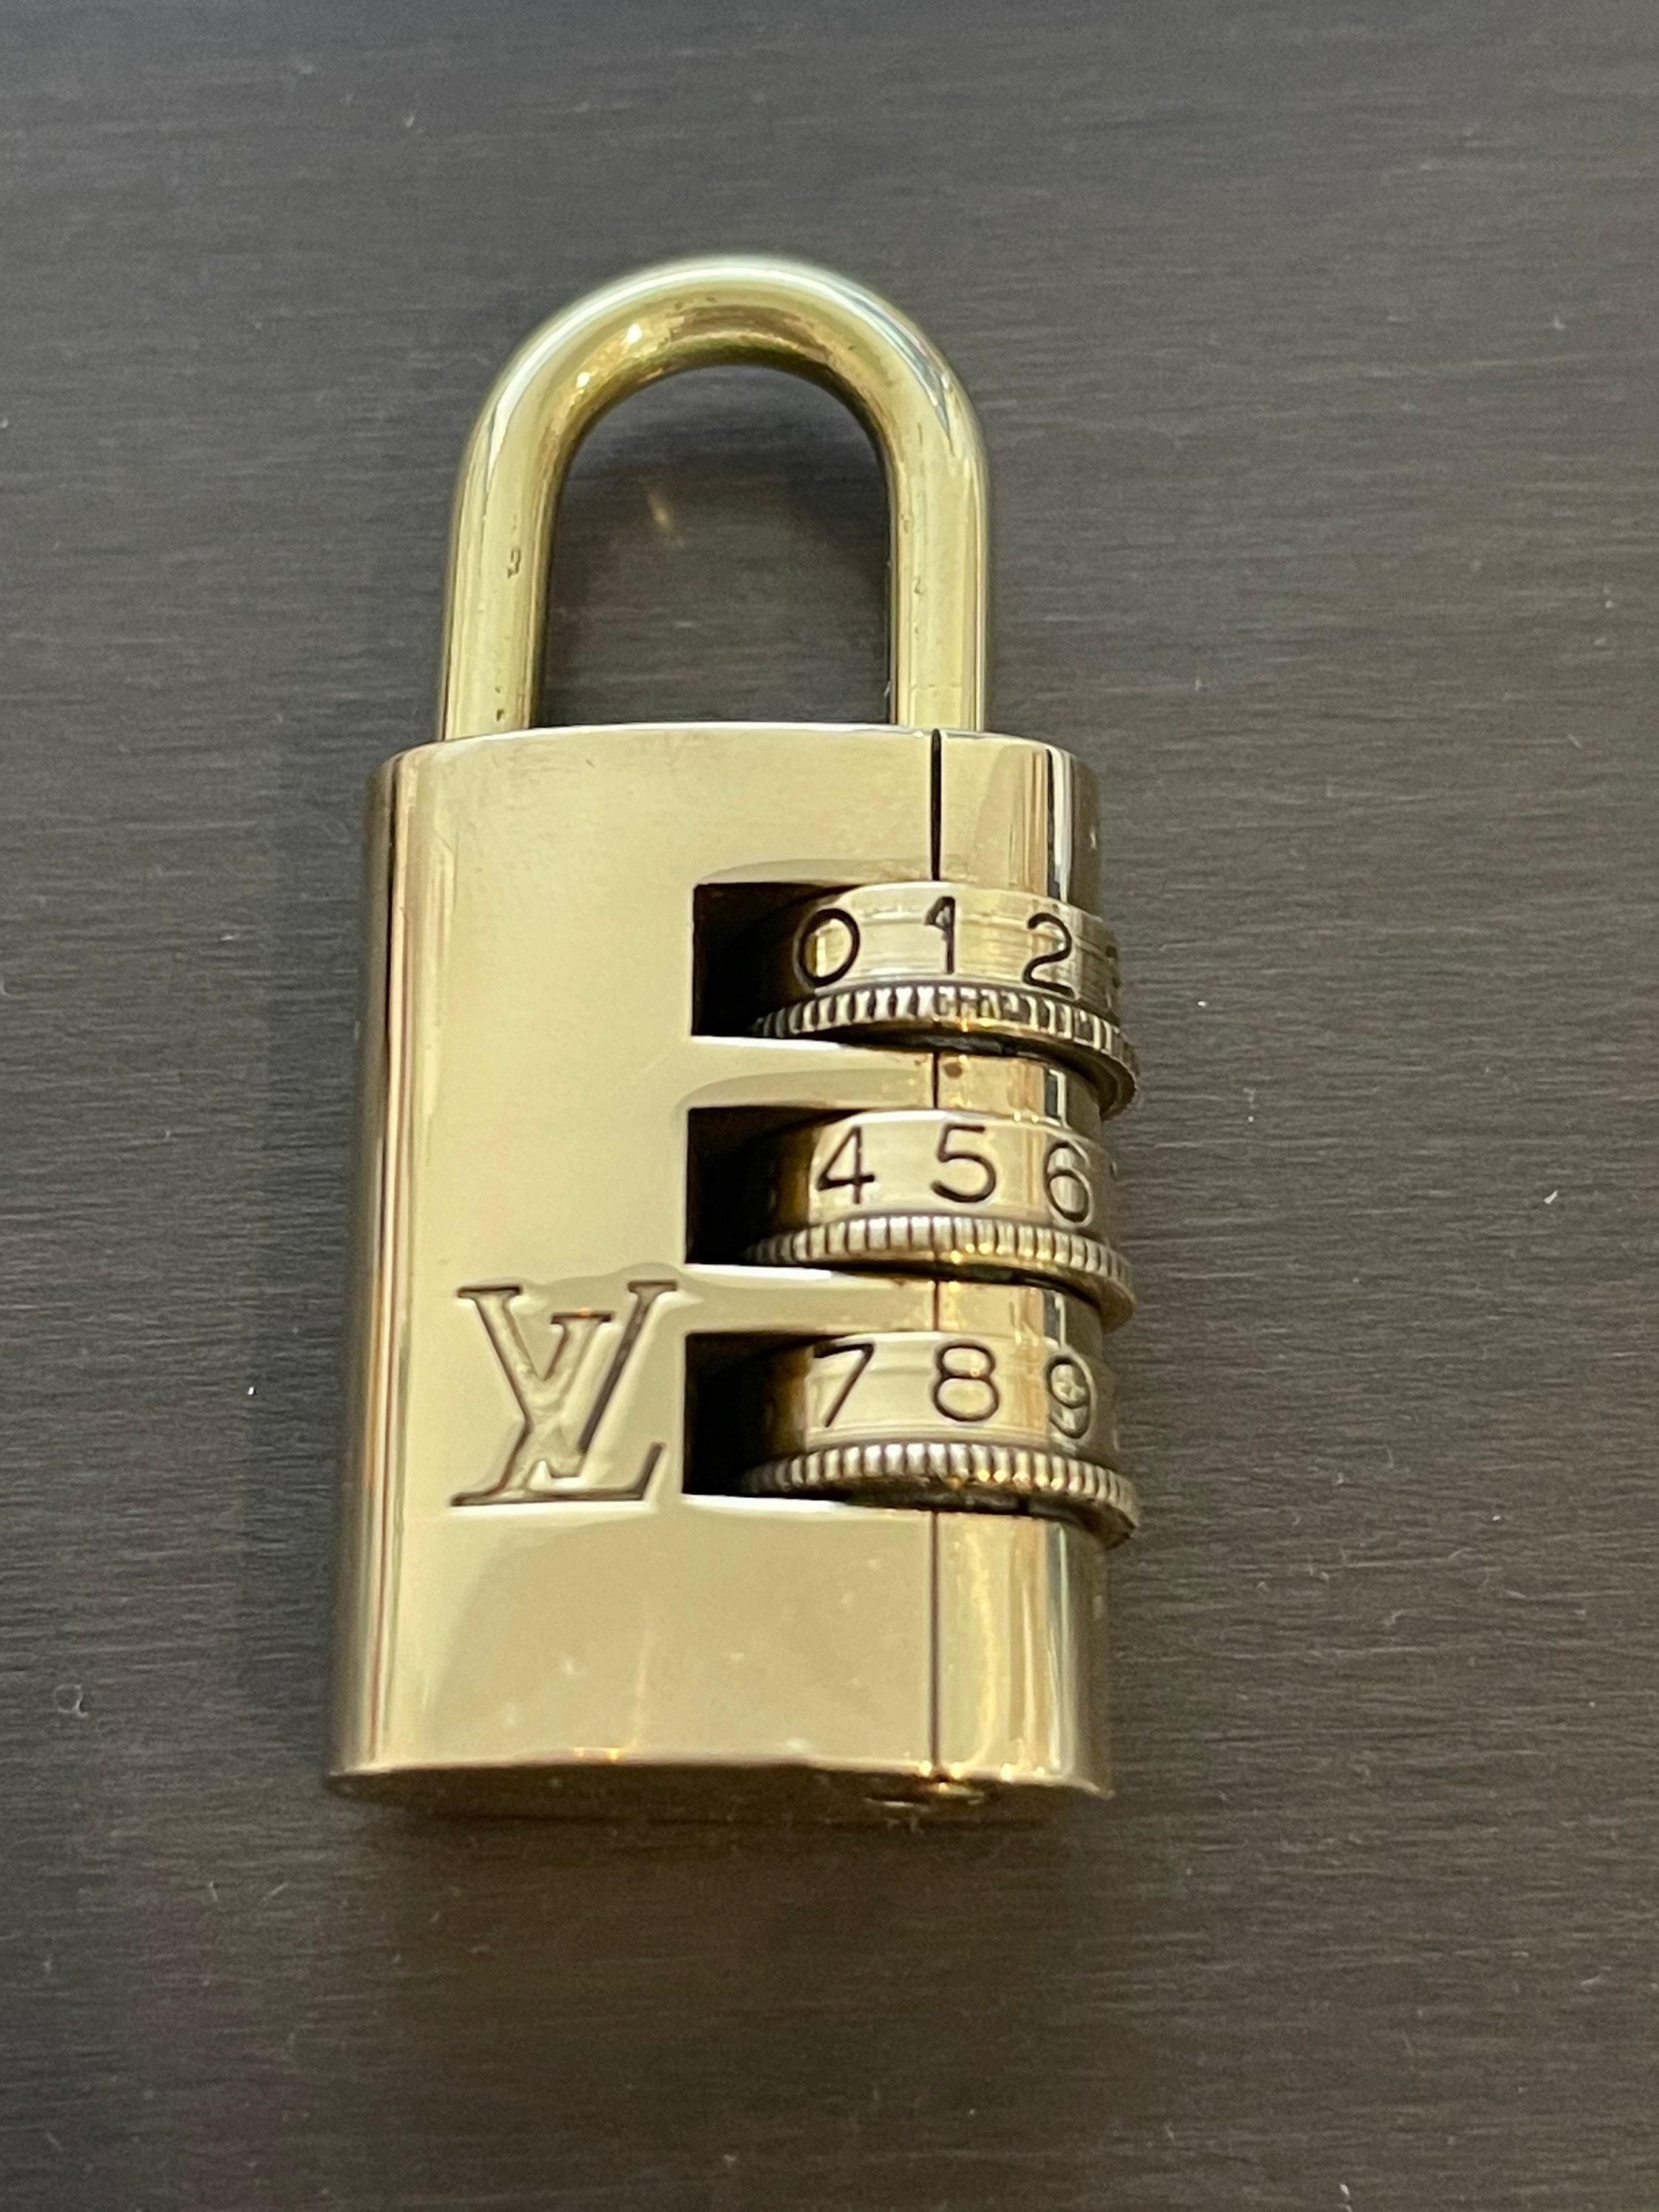 LOUIS VUITTON AUTH BRASS LOCK & KEY PADLOCK- POLISHED! Fits all bags!  USA